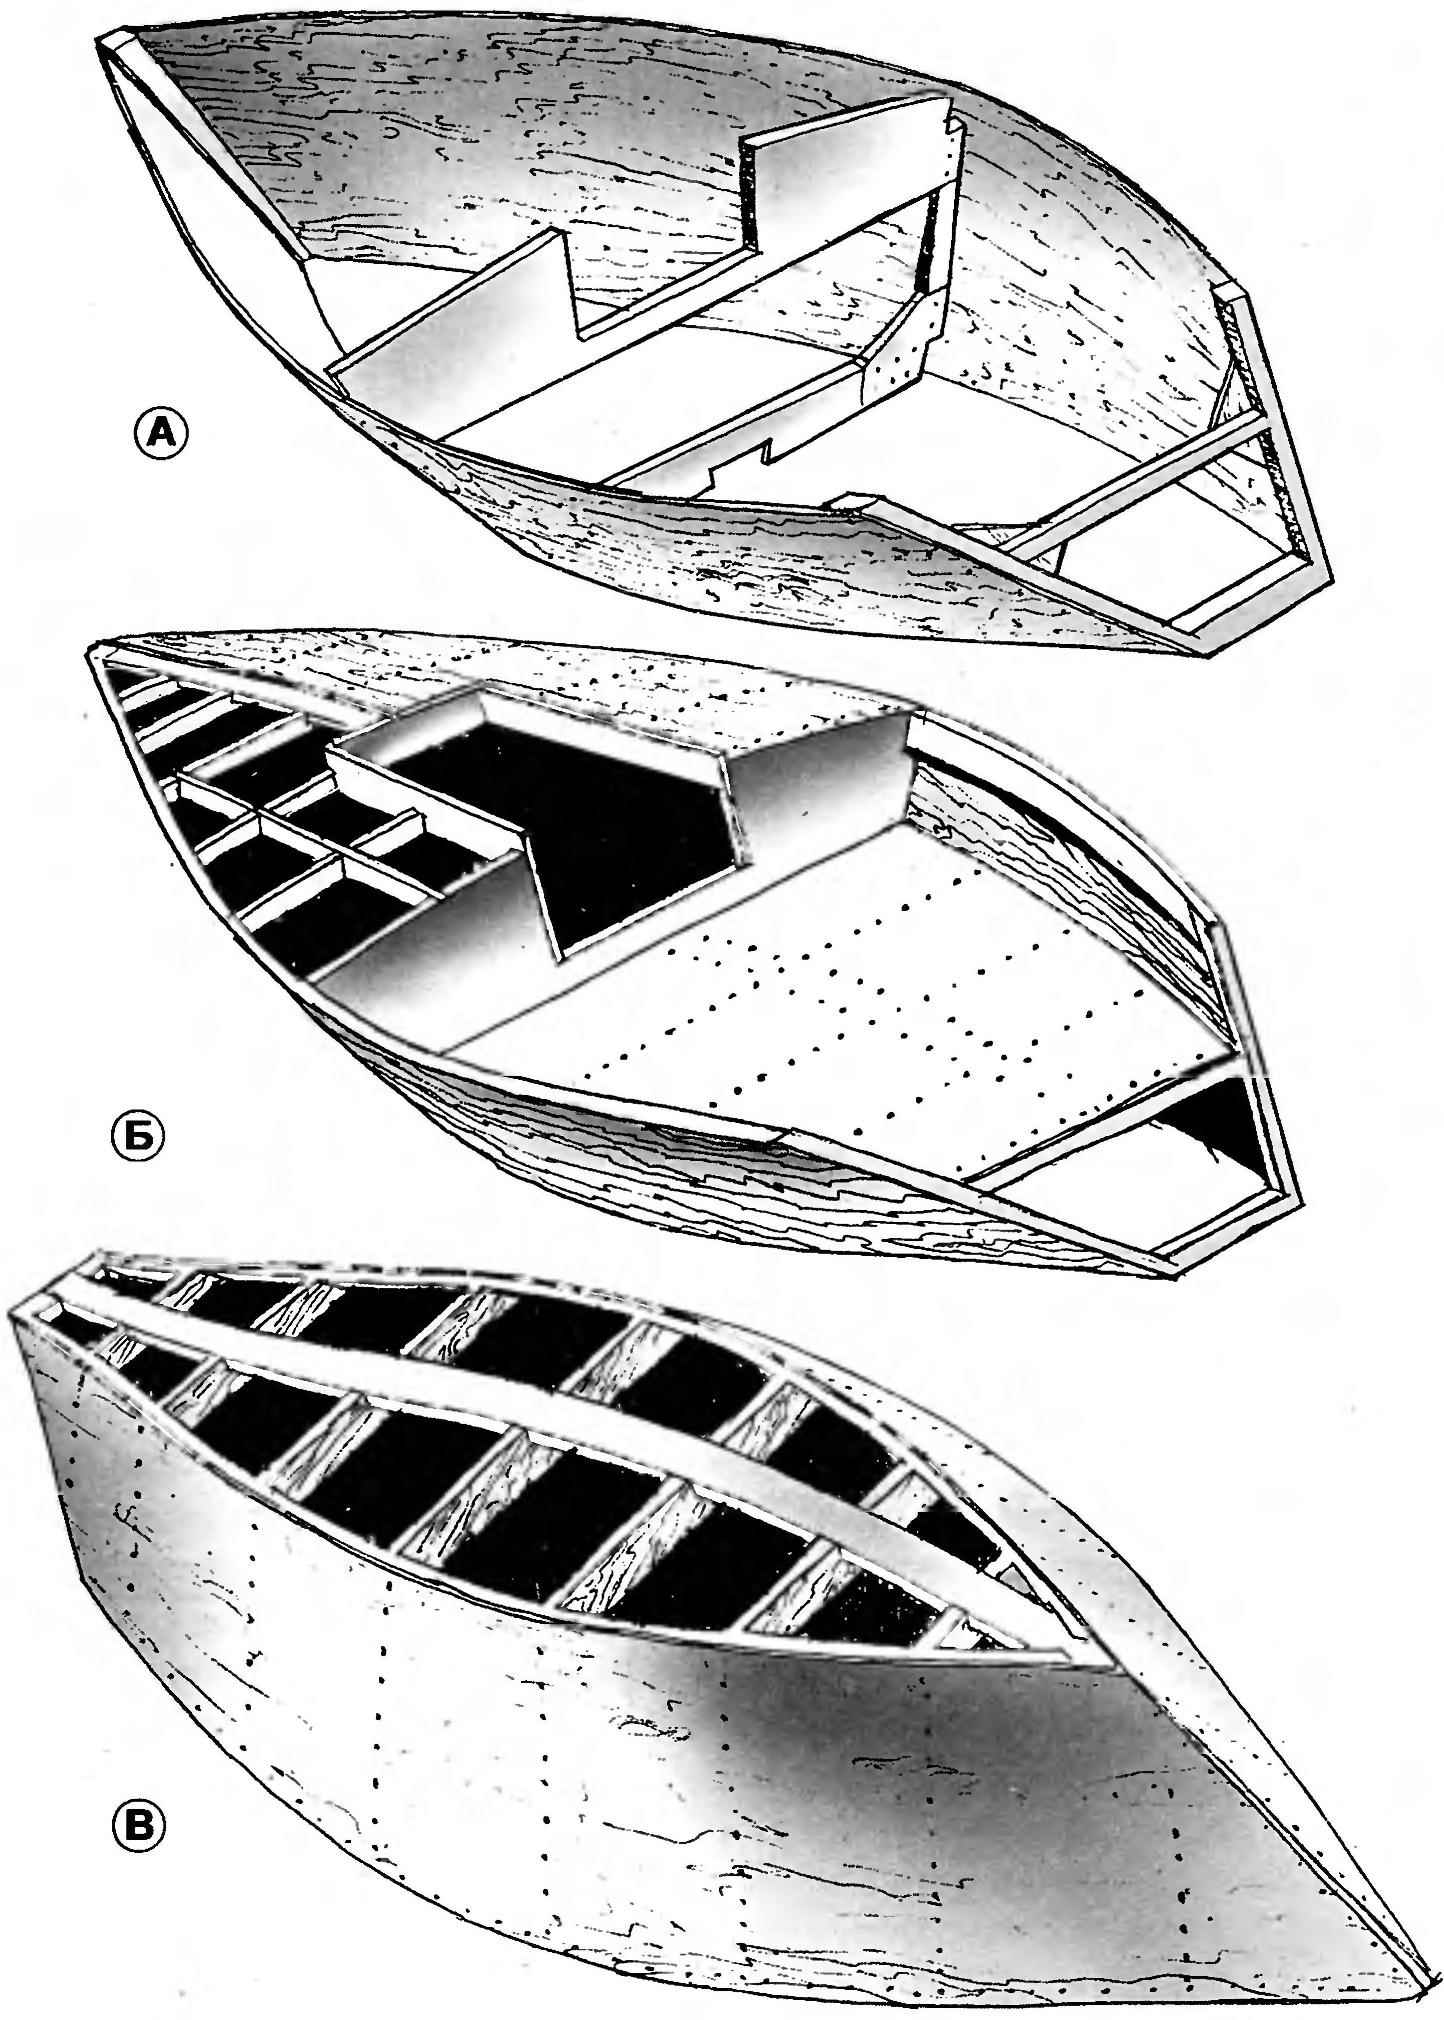 Fig. 5. During Assembly of the hull from flat items